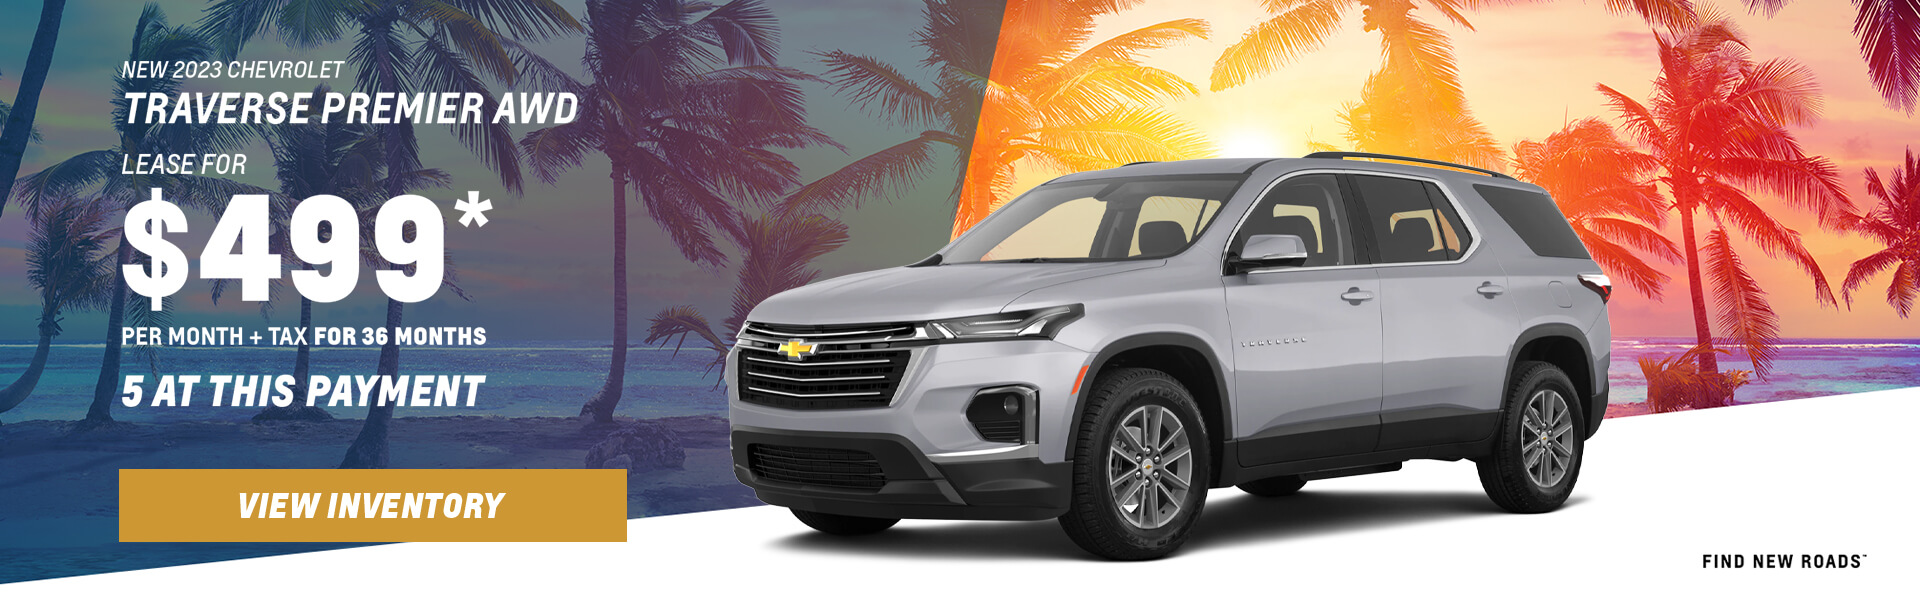 Find Your Perfect Ride at West Covina's Premier Chevrolet Dealer